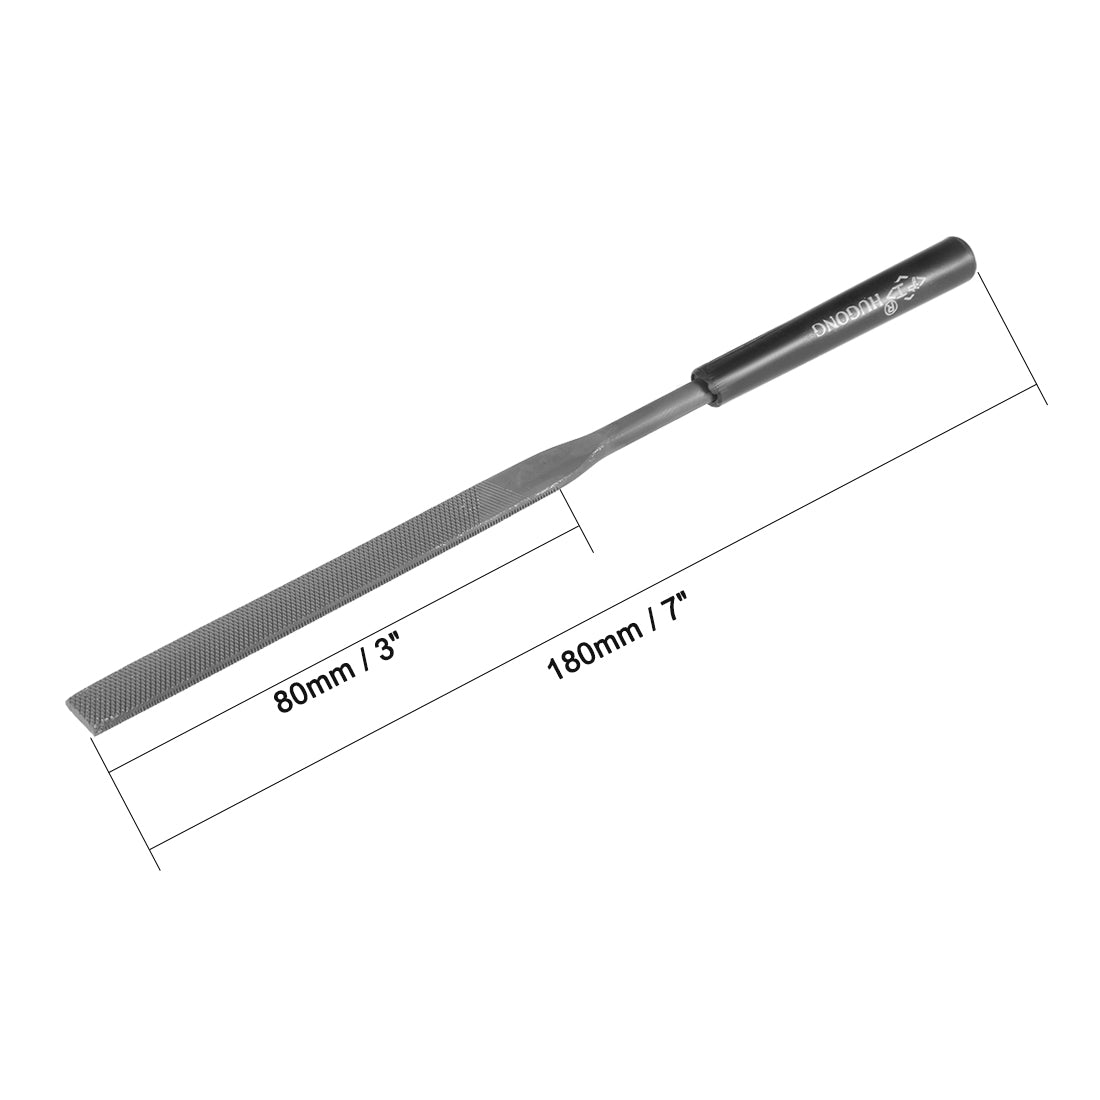 uxcell Uxcell Second Cut Steel Flat Needle File with Plastic Handle, 5mm x 180mm